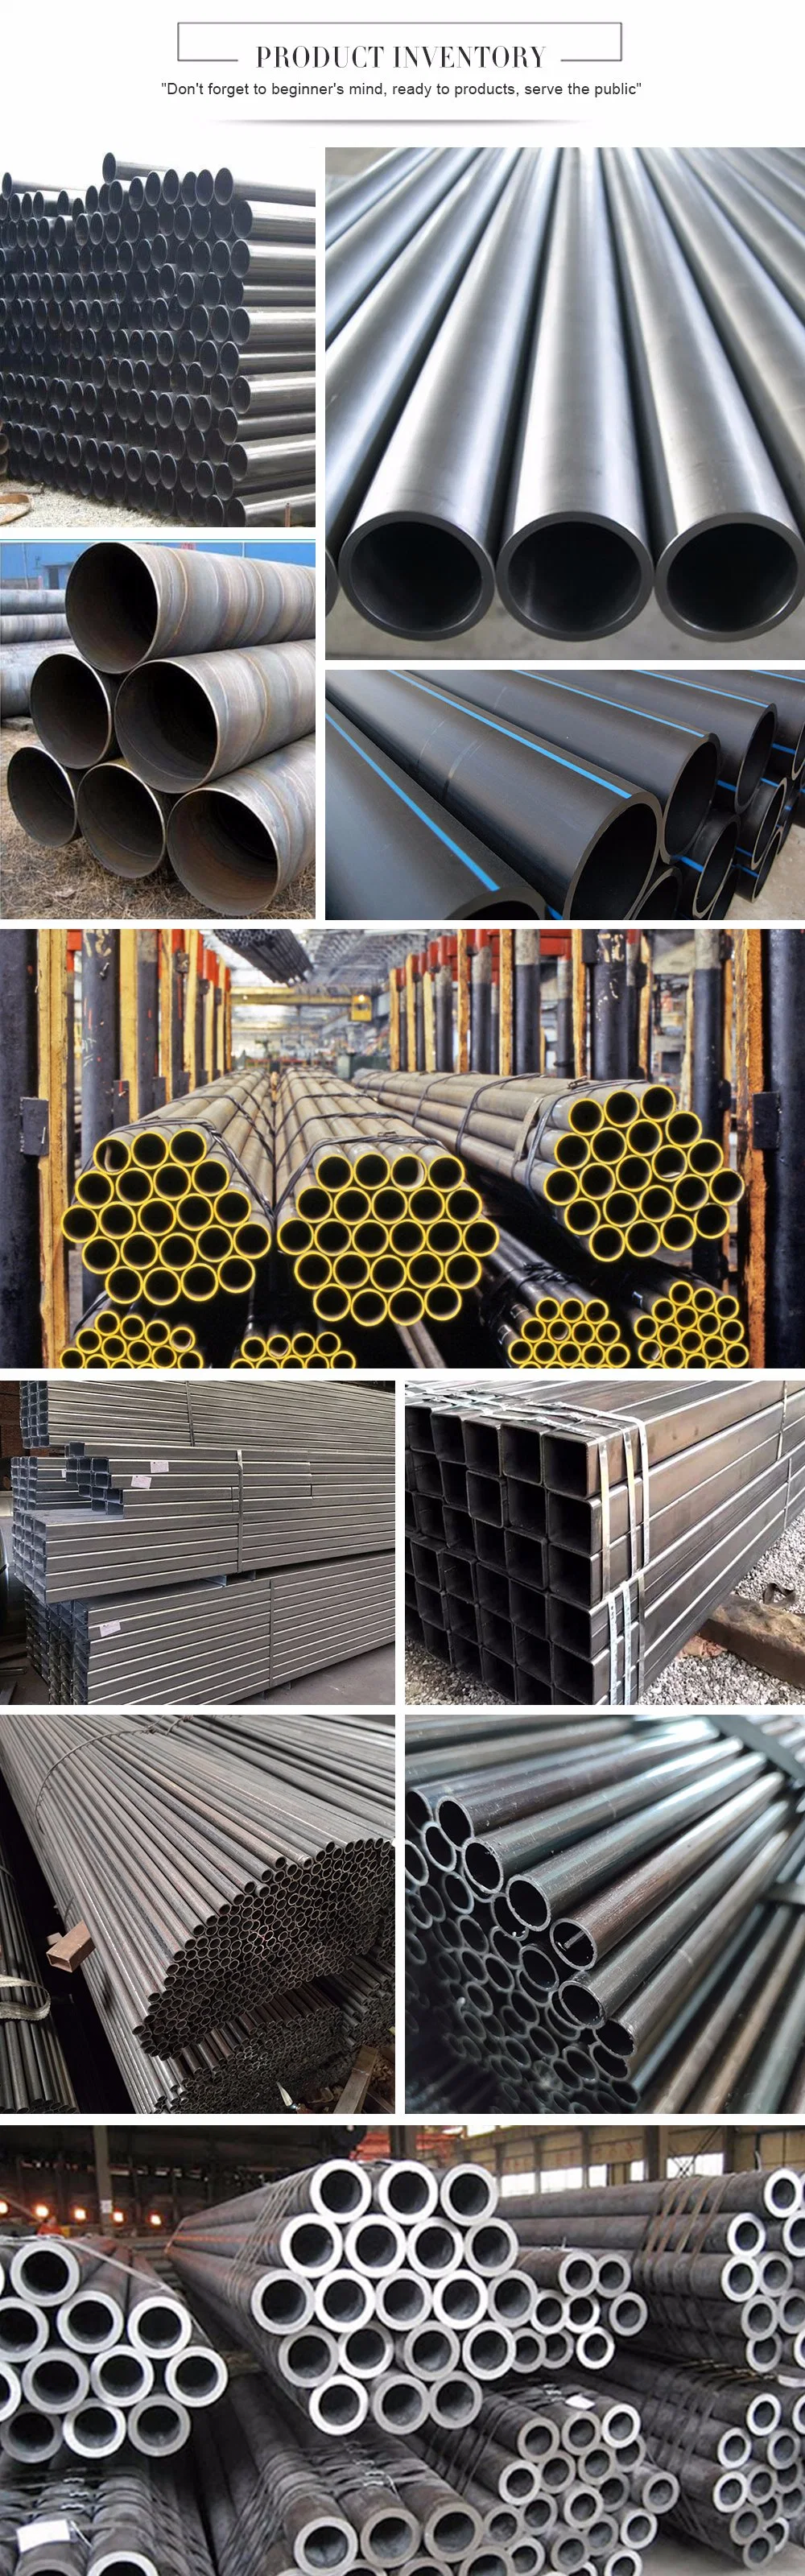 Alloy Pipes Carbon Steel P91 Alloy Steel High Quality Seamless